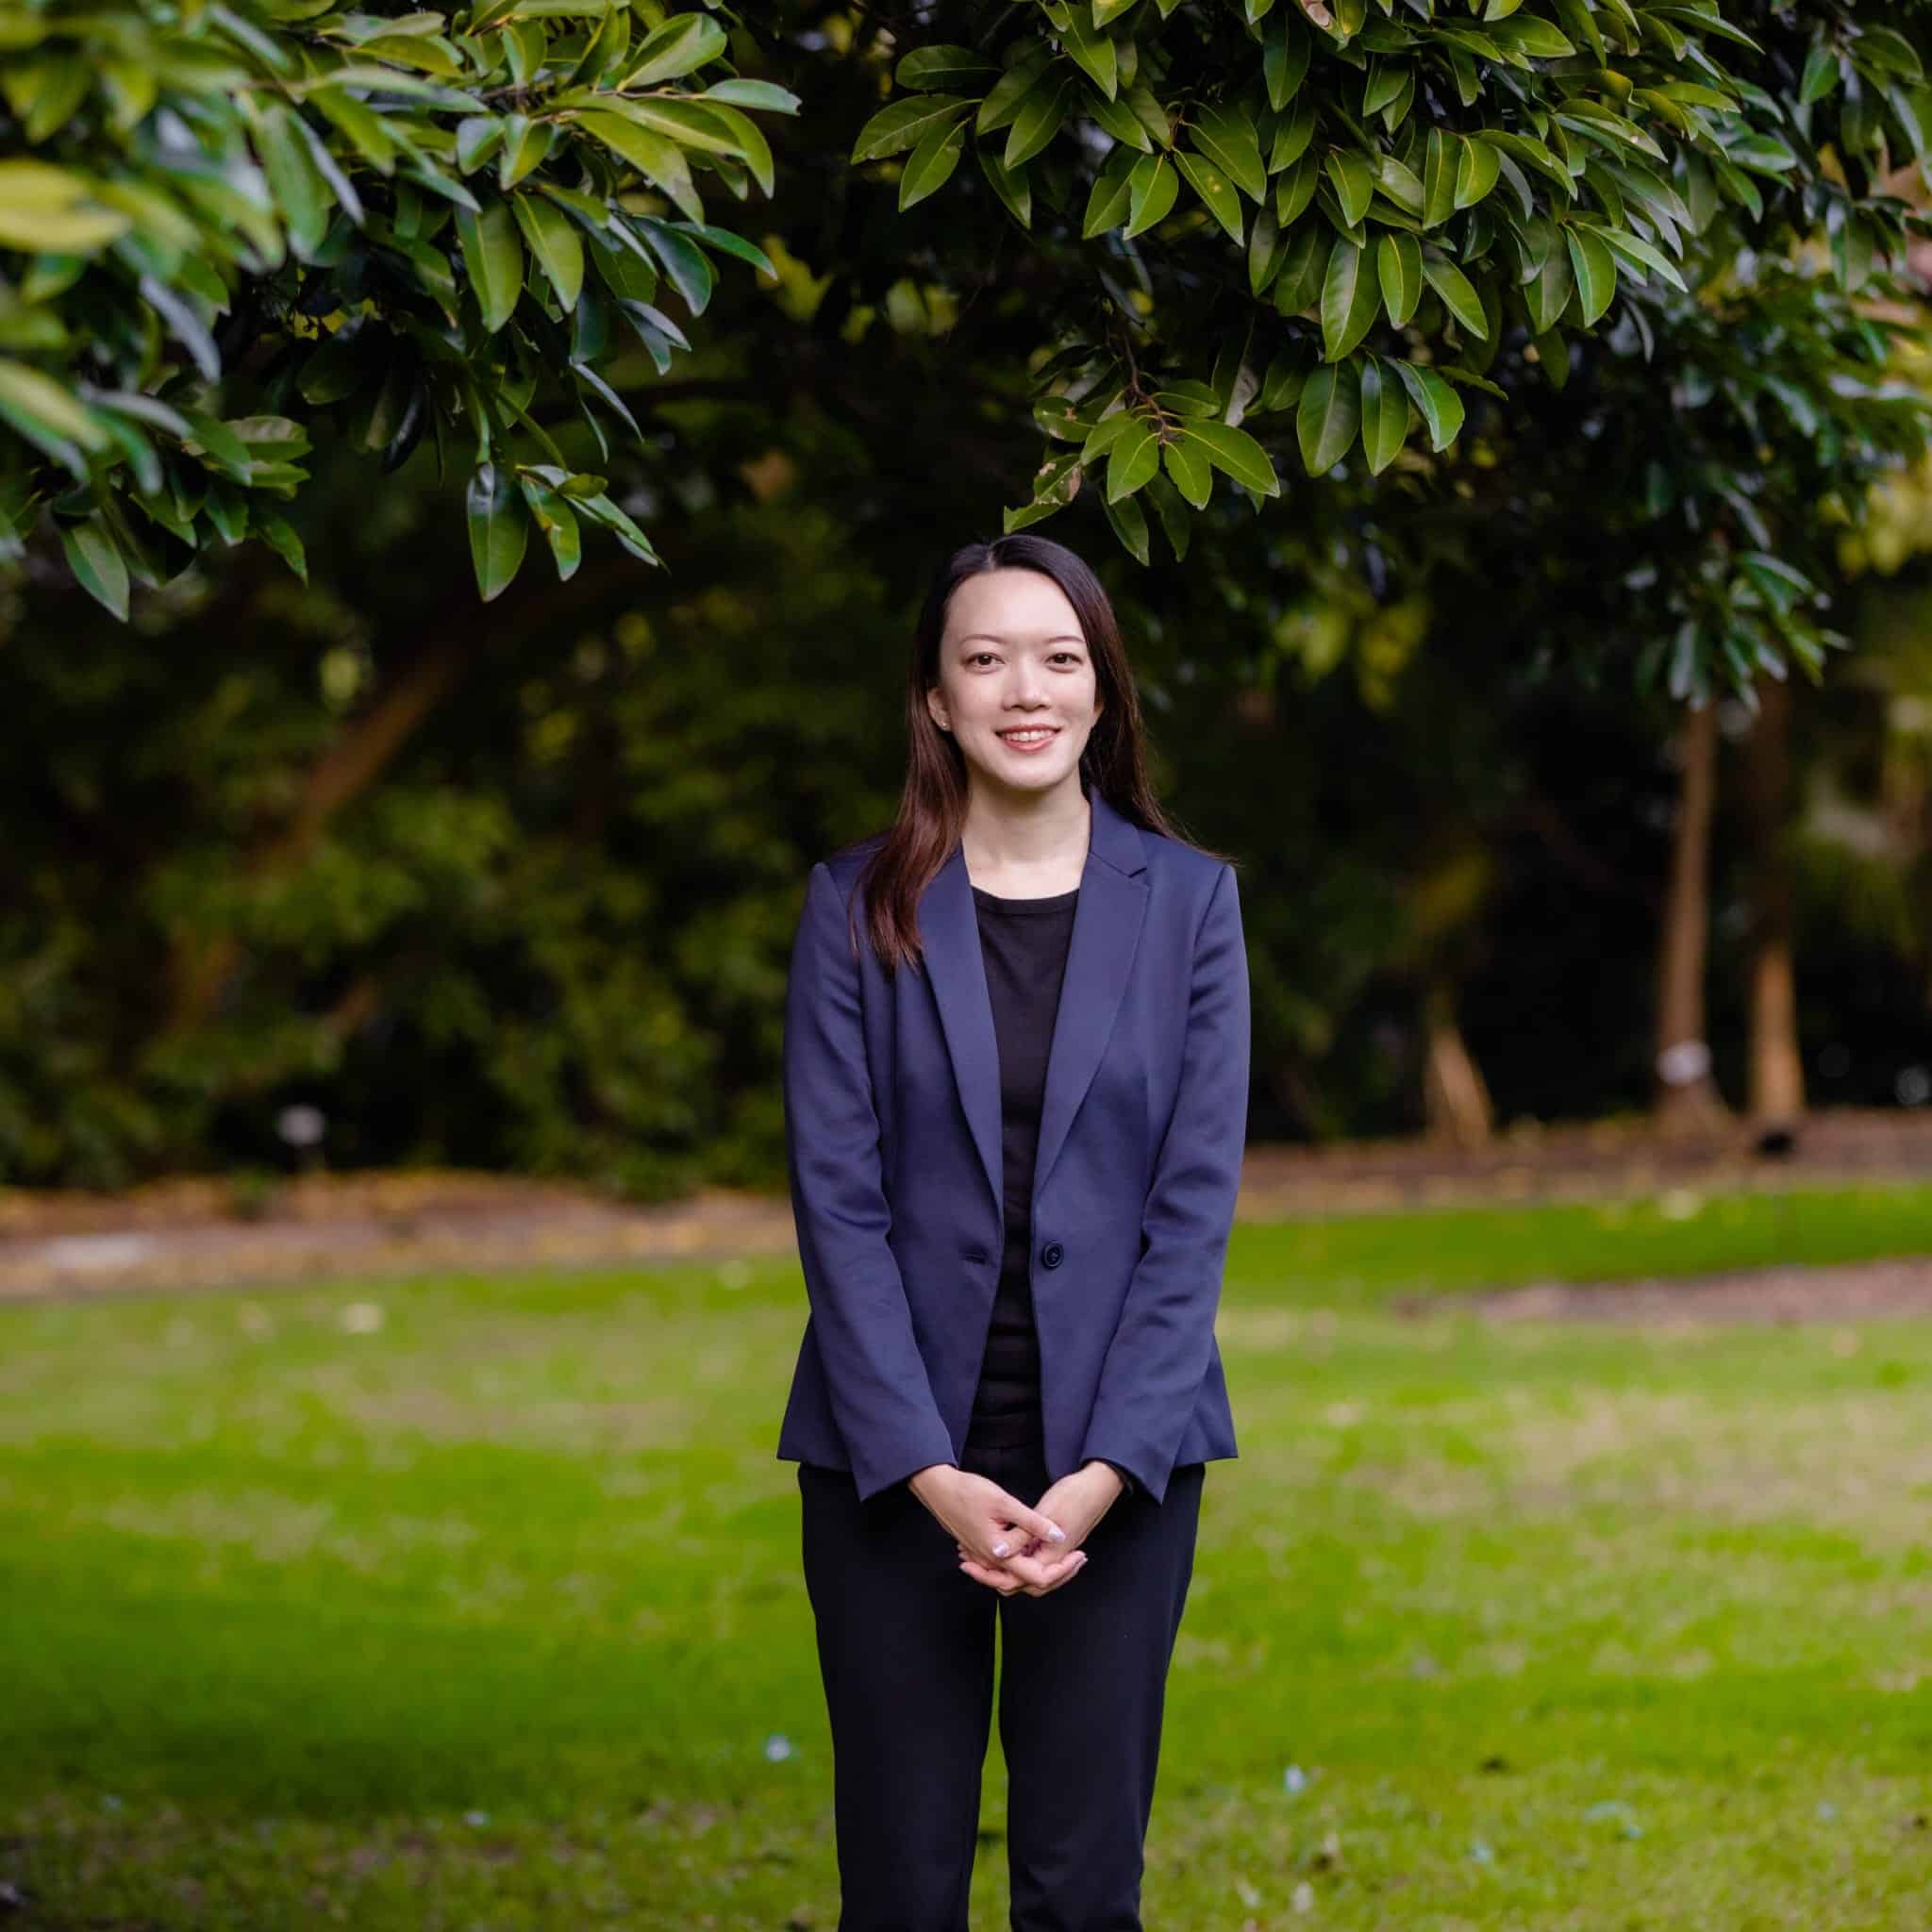 Jade Tsang, a young woman in a business suit, standing in front of a tree.